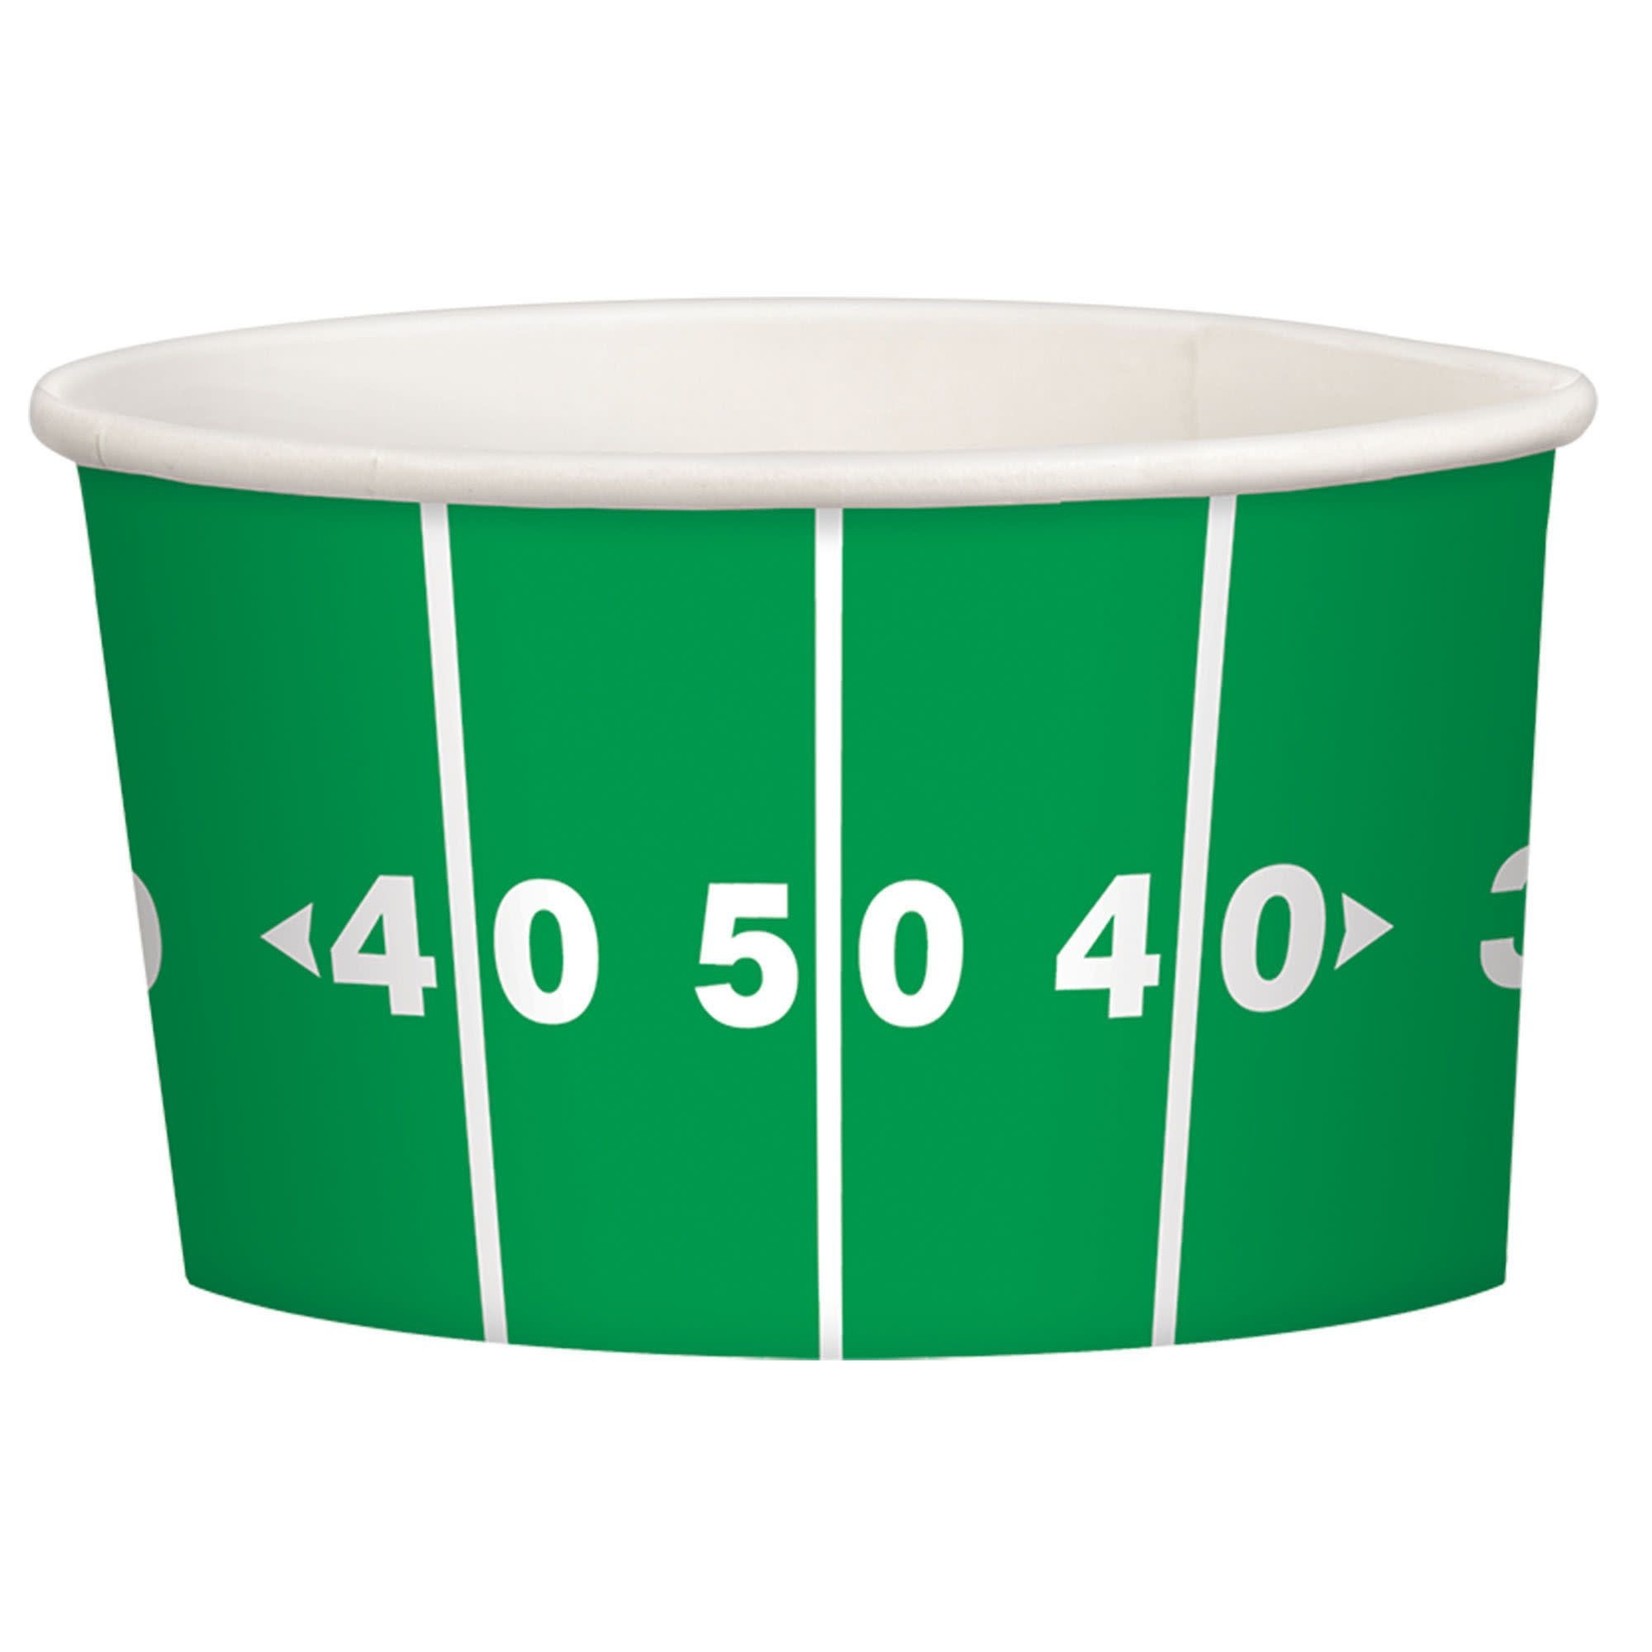 Amscan Football Snack Cups - 8ct.